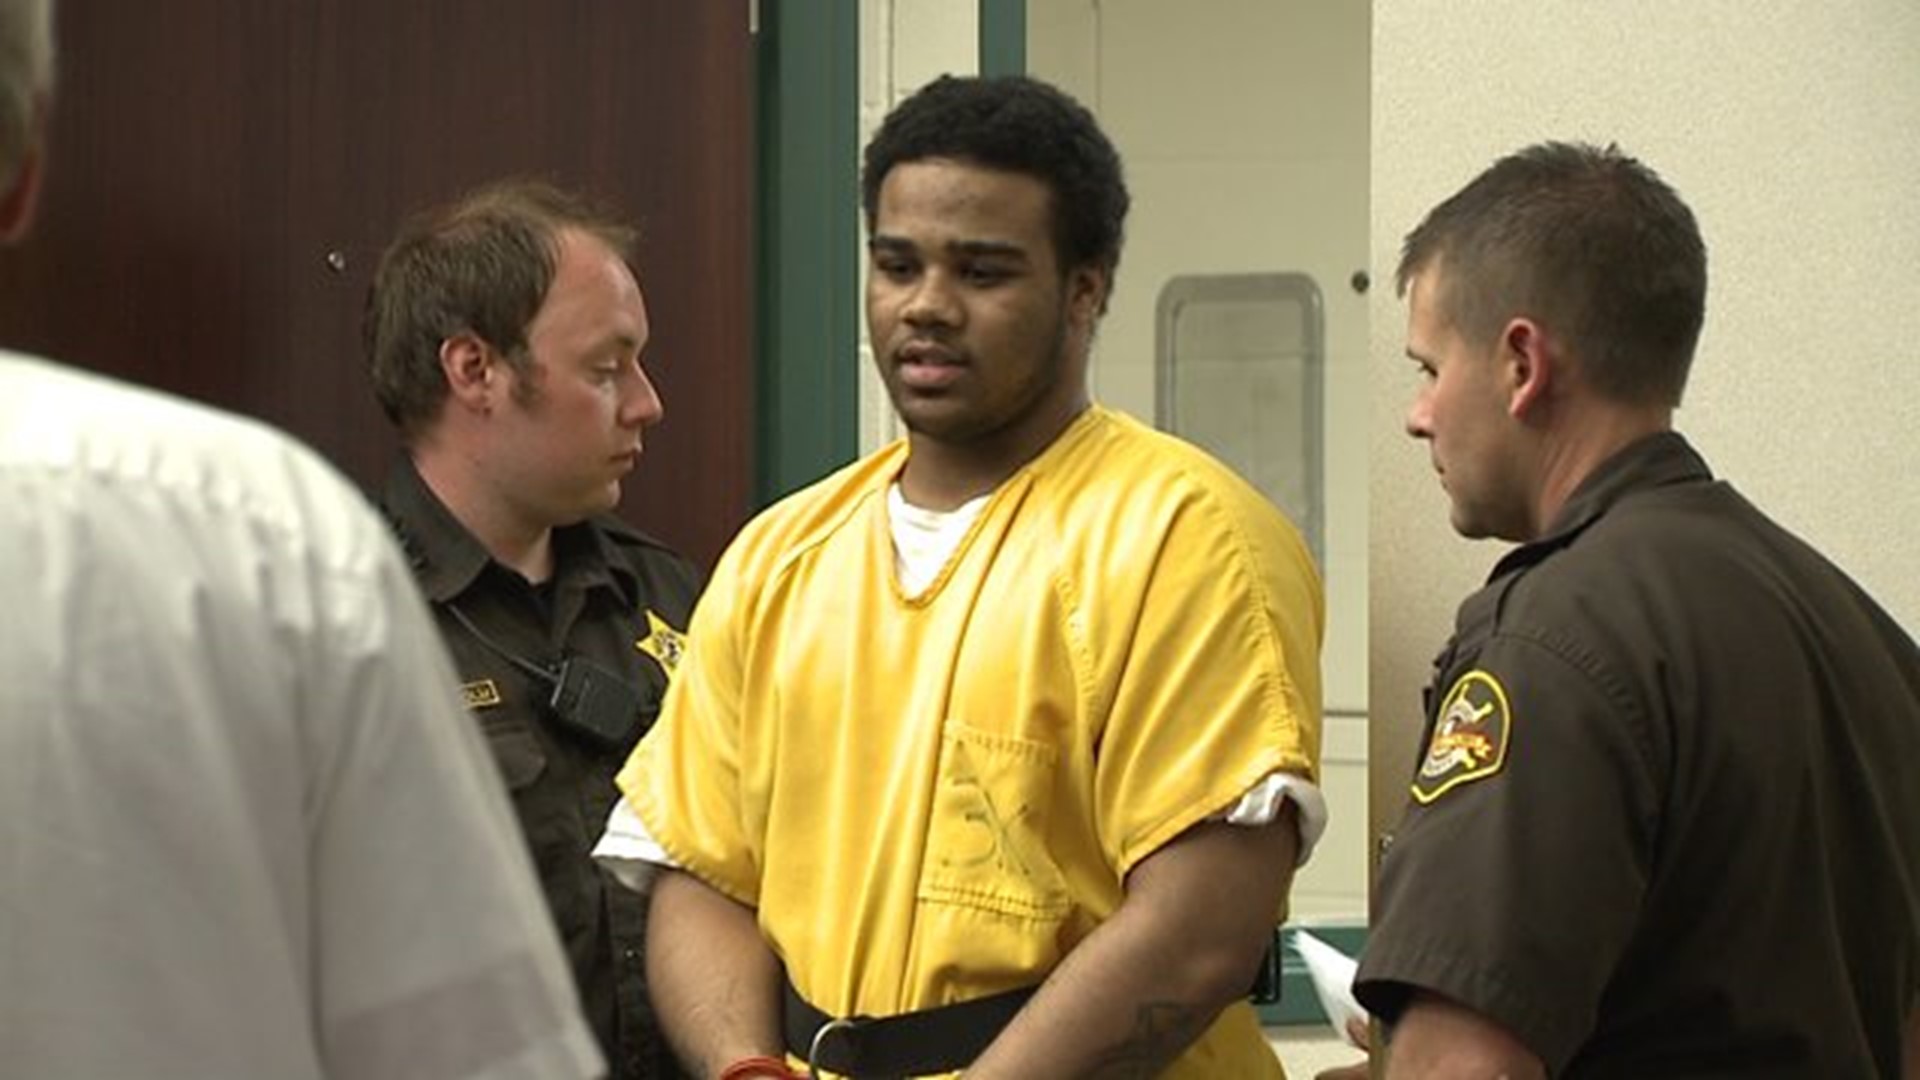 Aaron Henderson sentenced to 40 years for involvement in tattoo artist murder